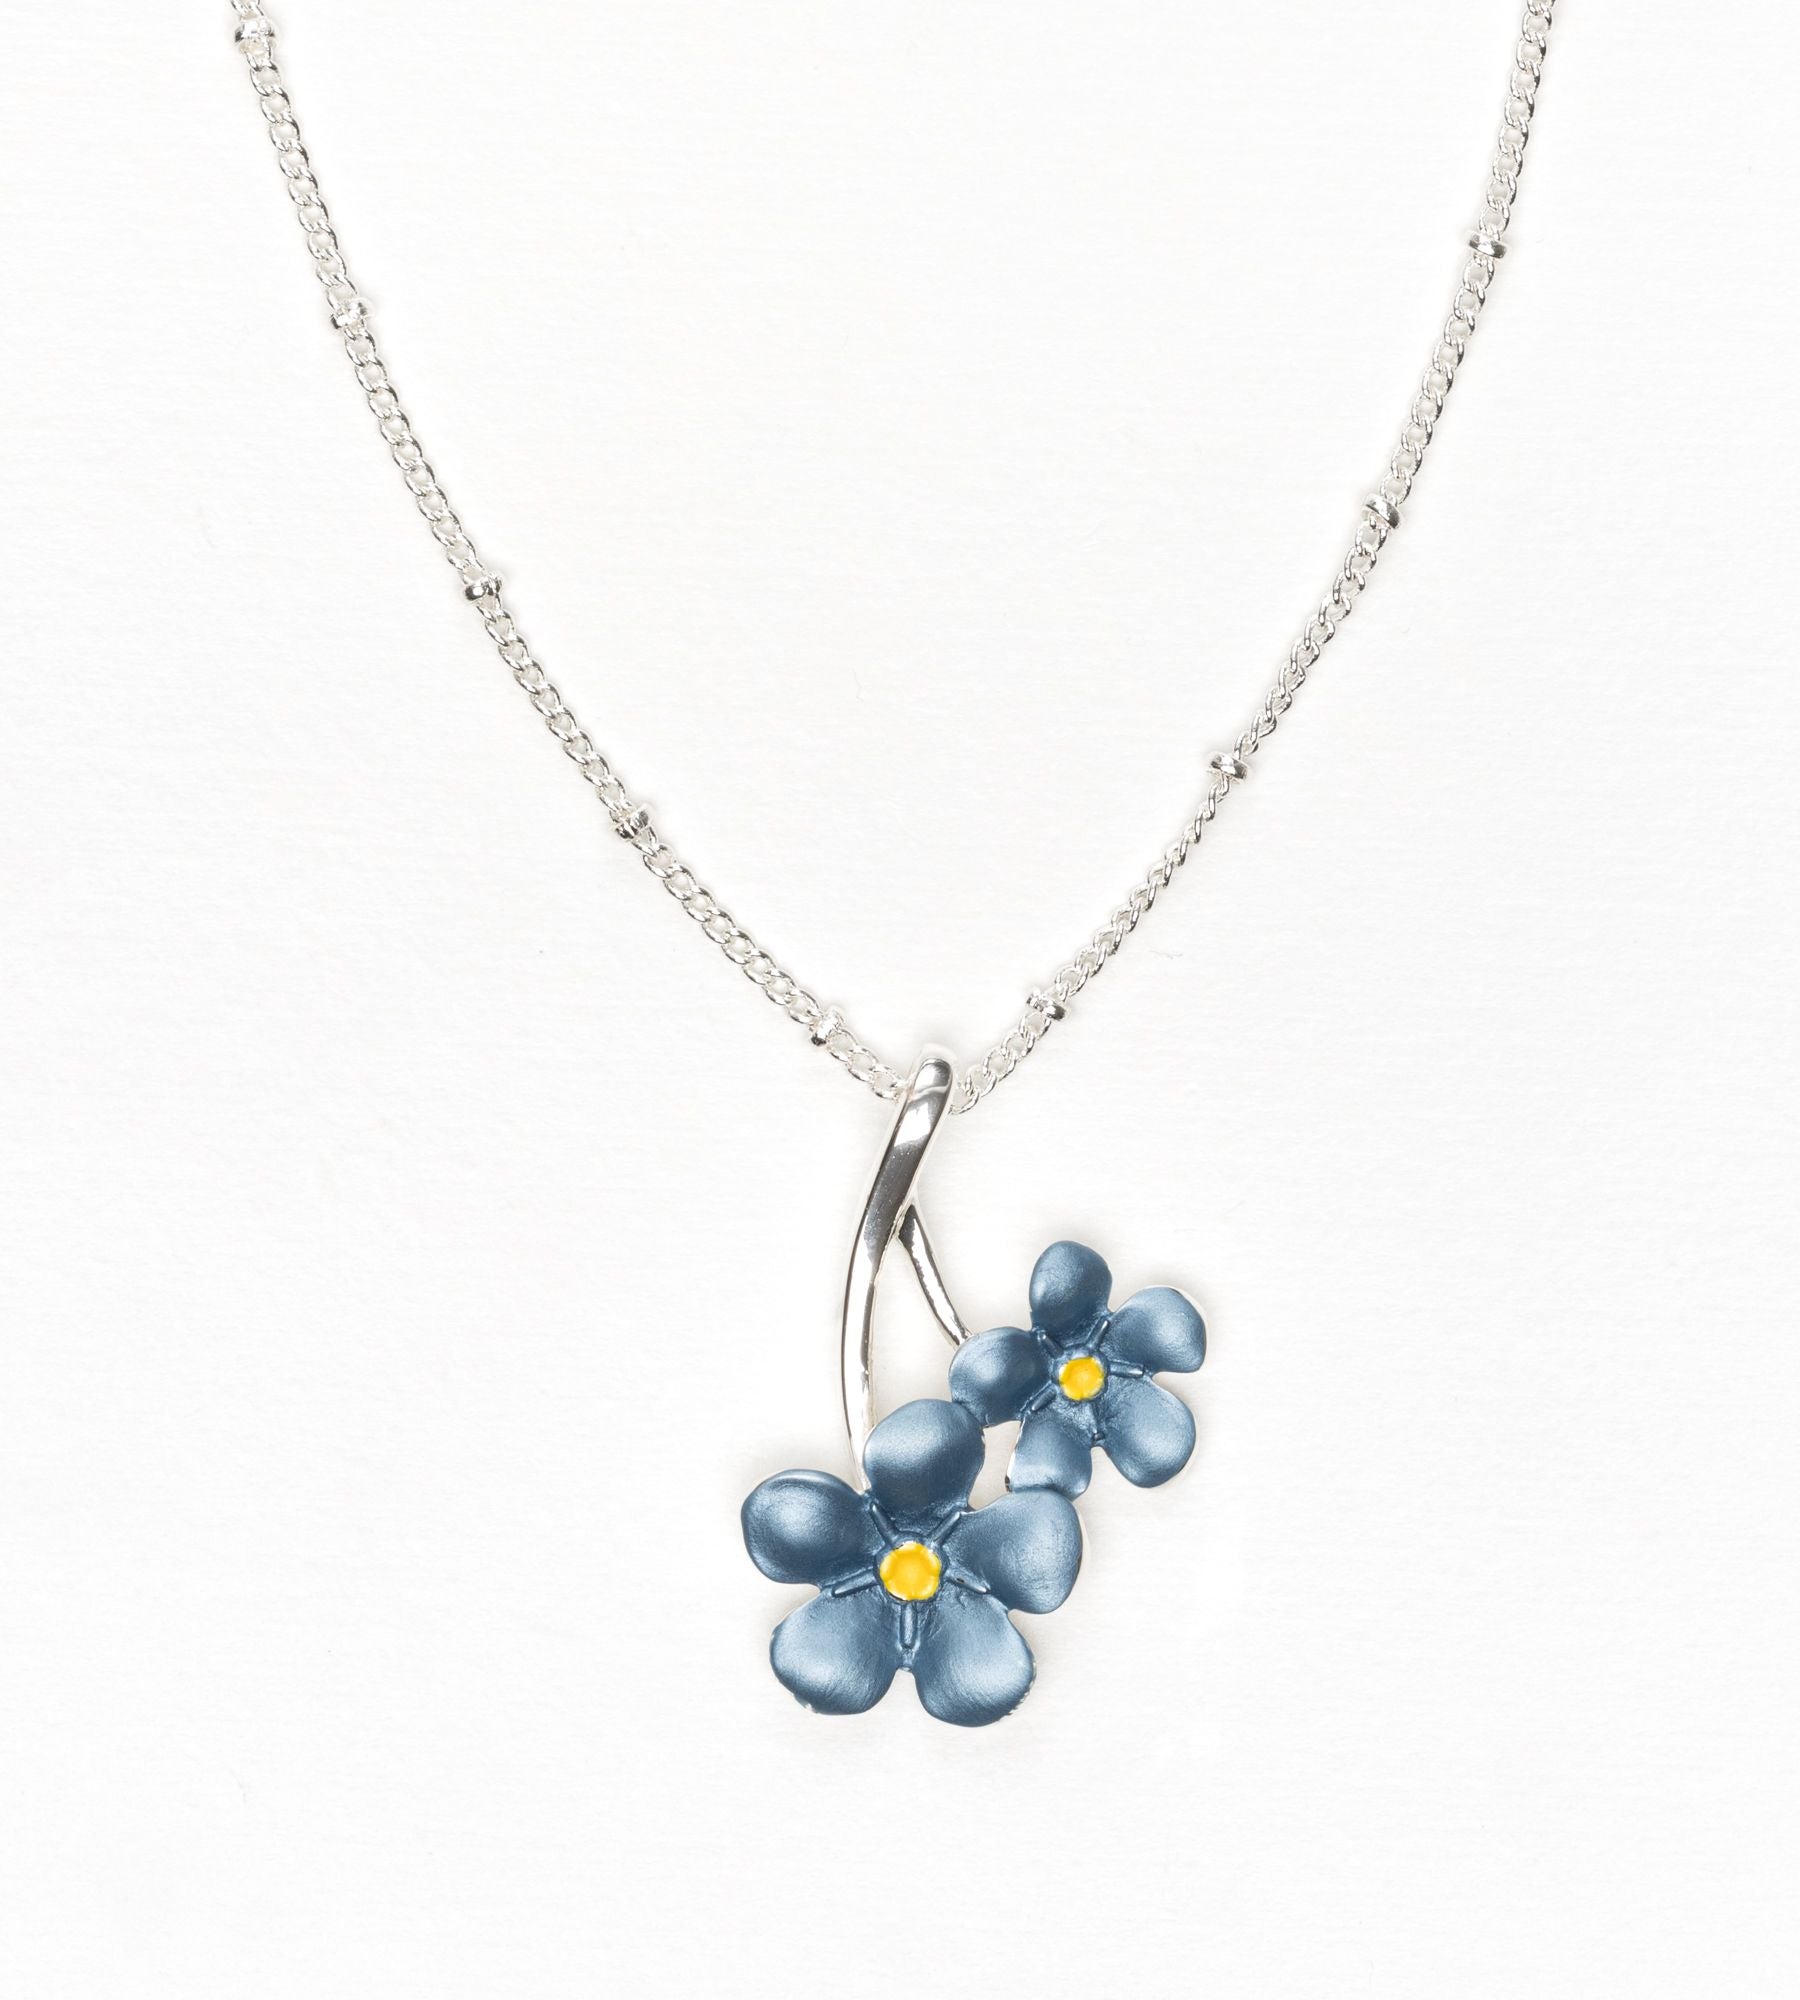 Enamel forget-me-not pendant on silver-plated chain